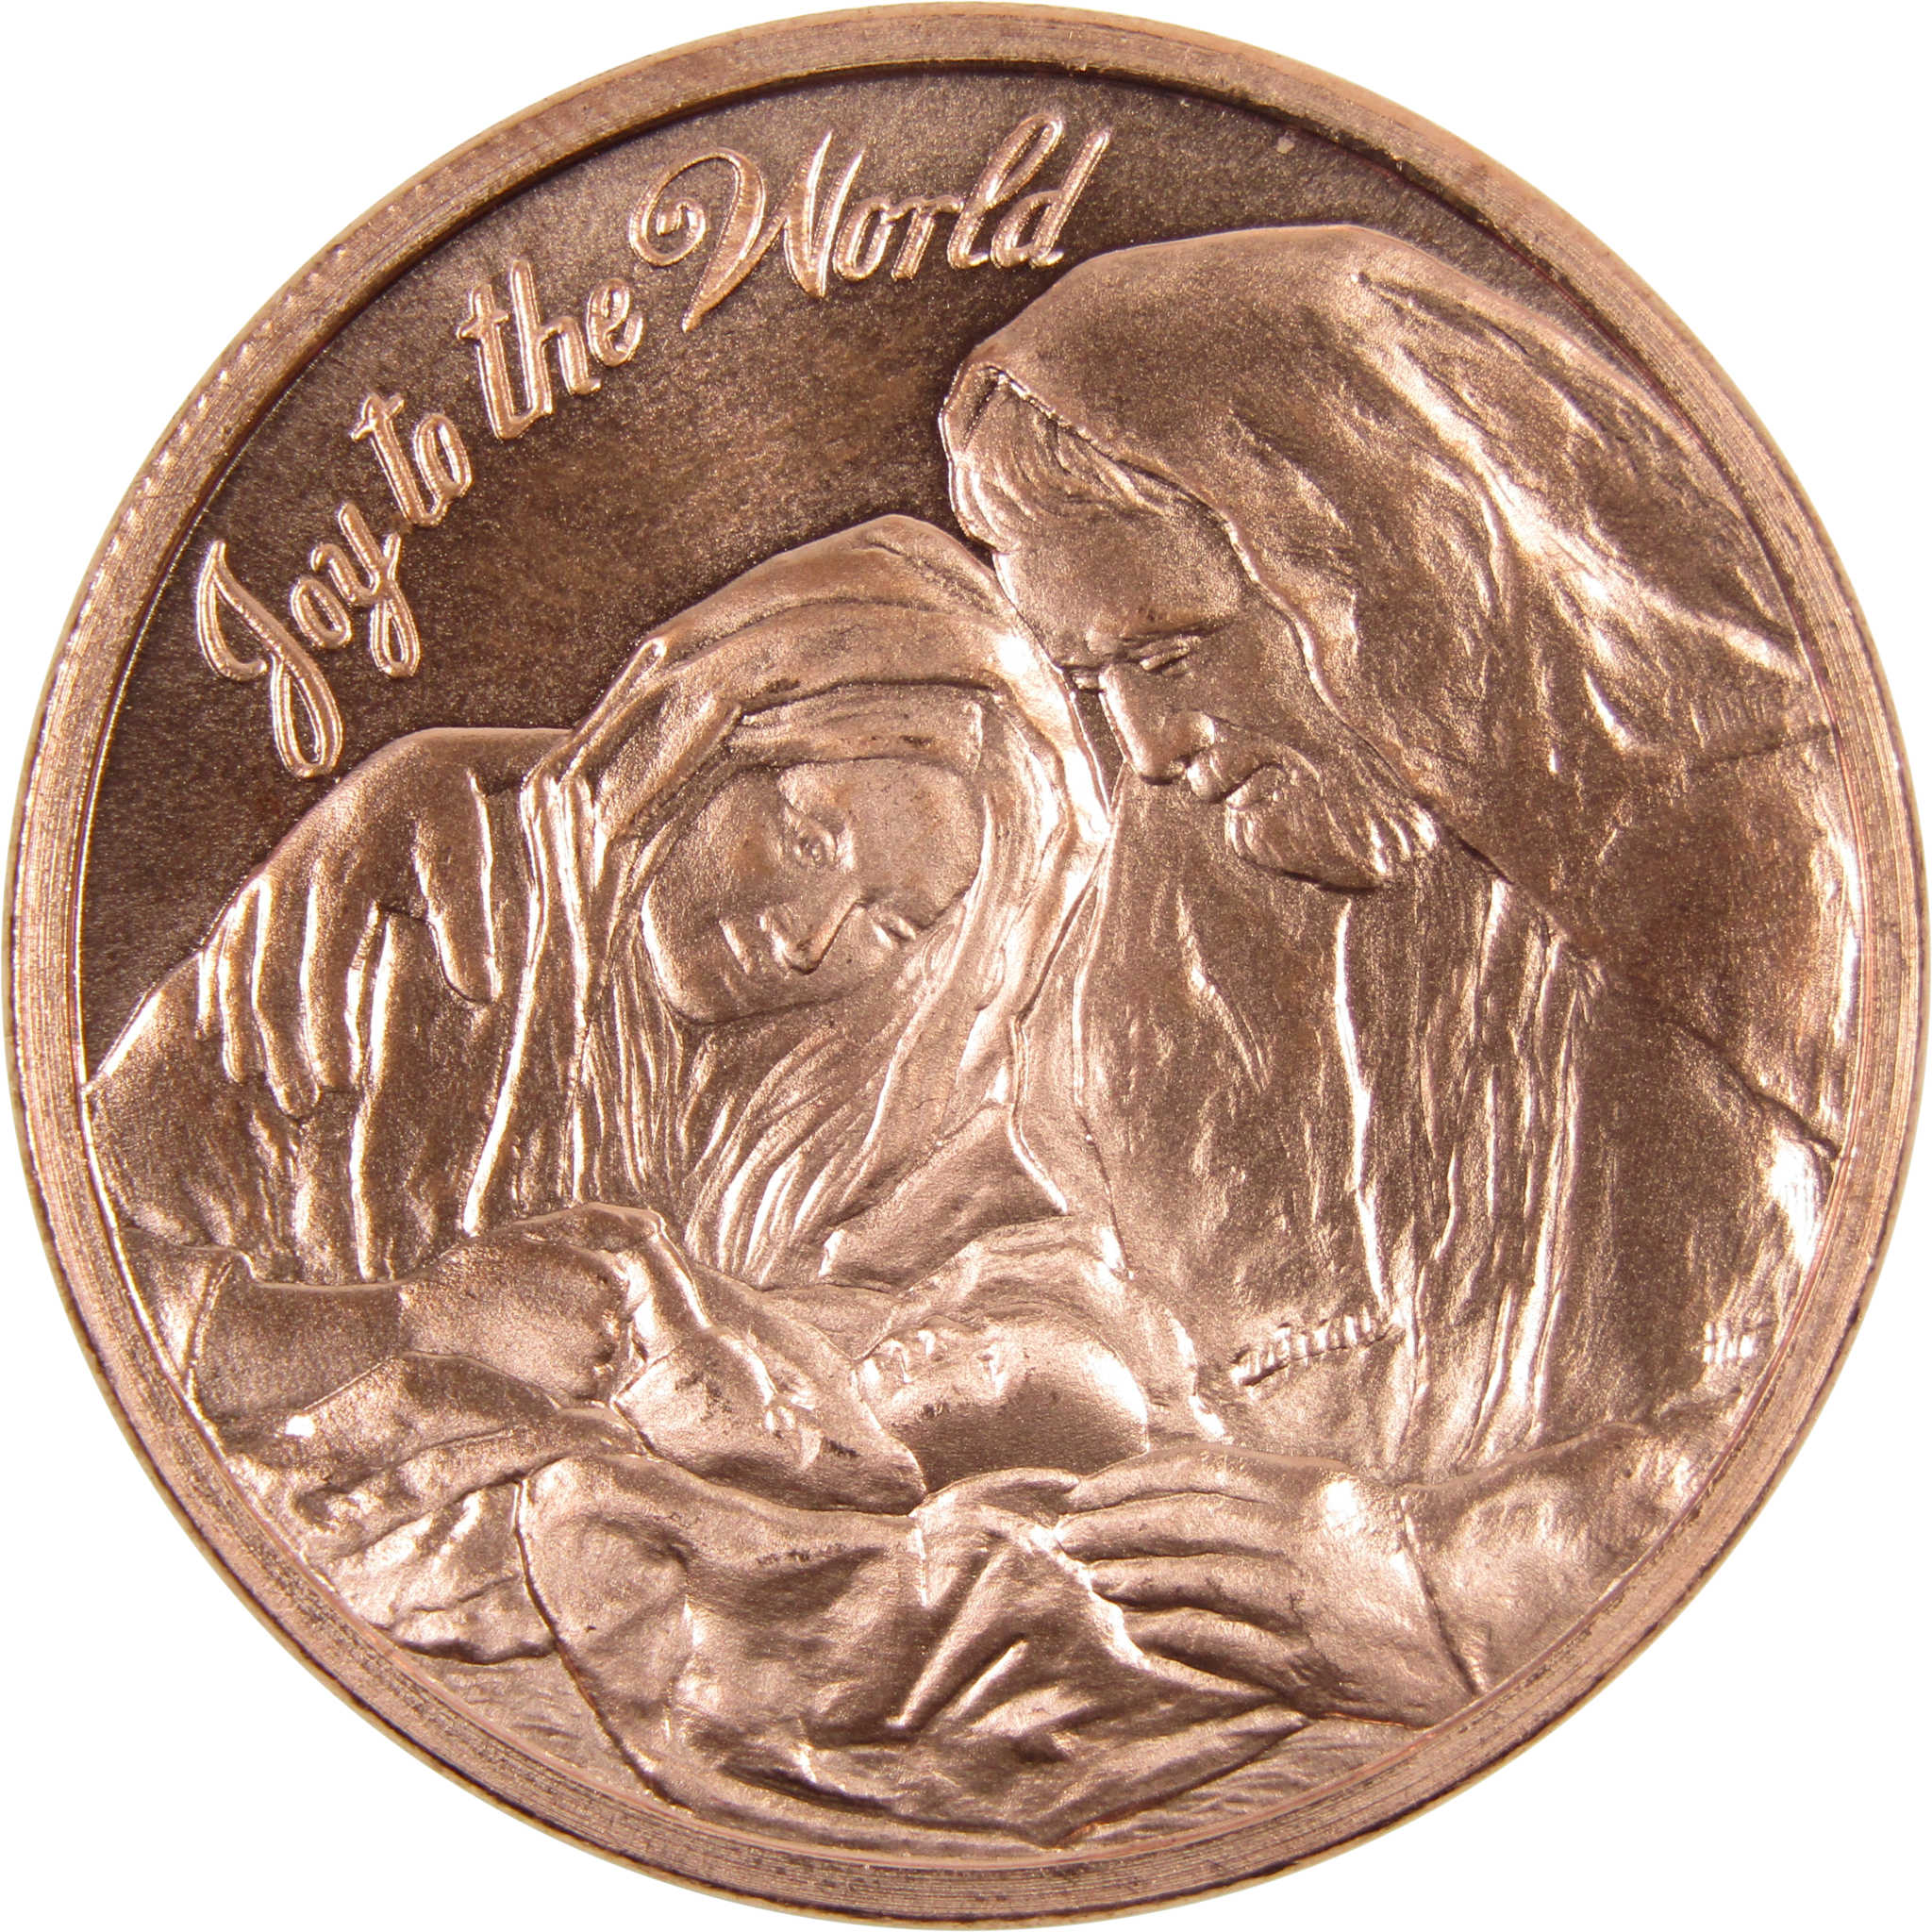 Joy to the World 1 oz .999 Copper Round Holiday Collectible 2020